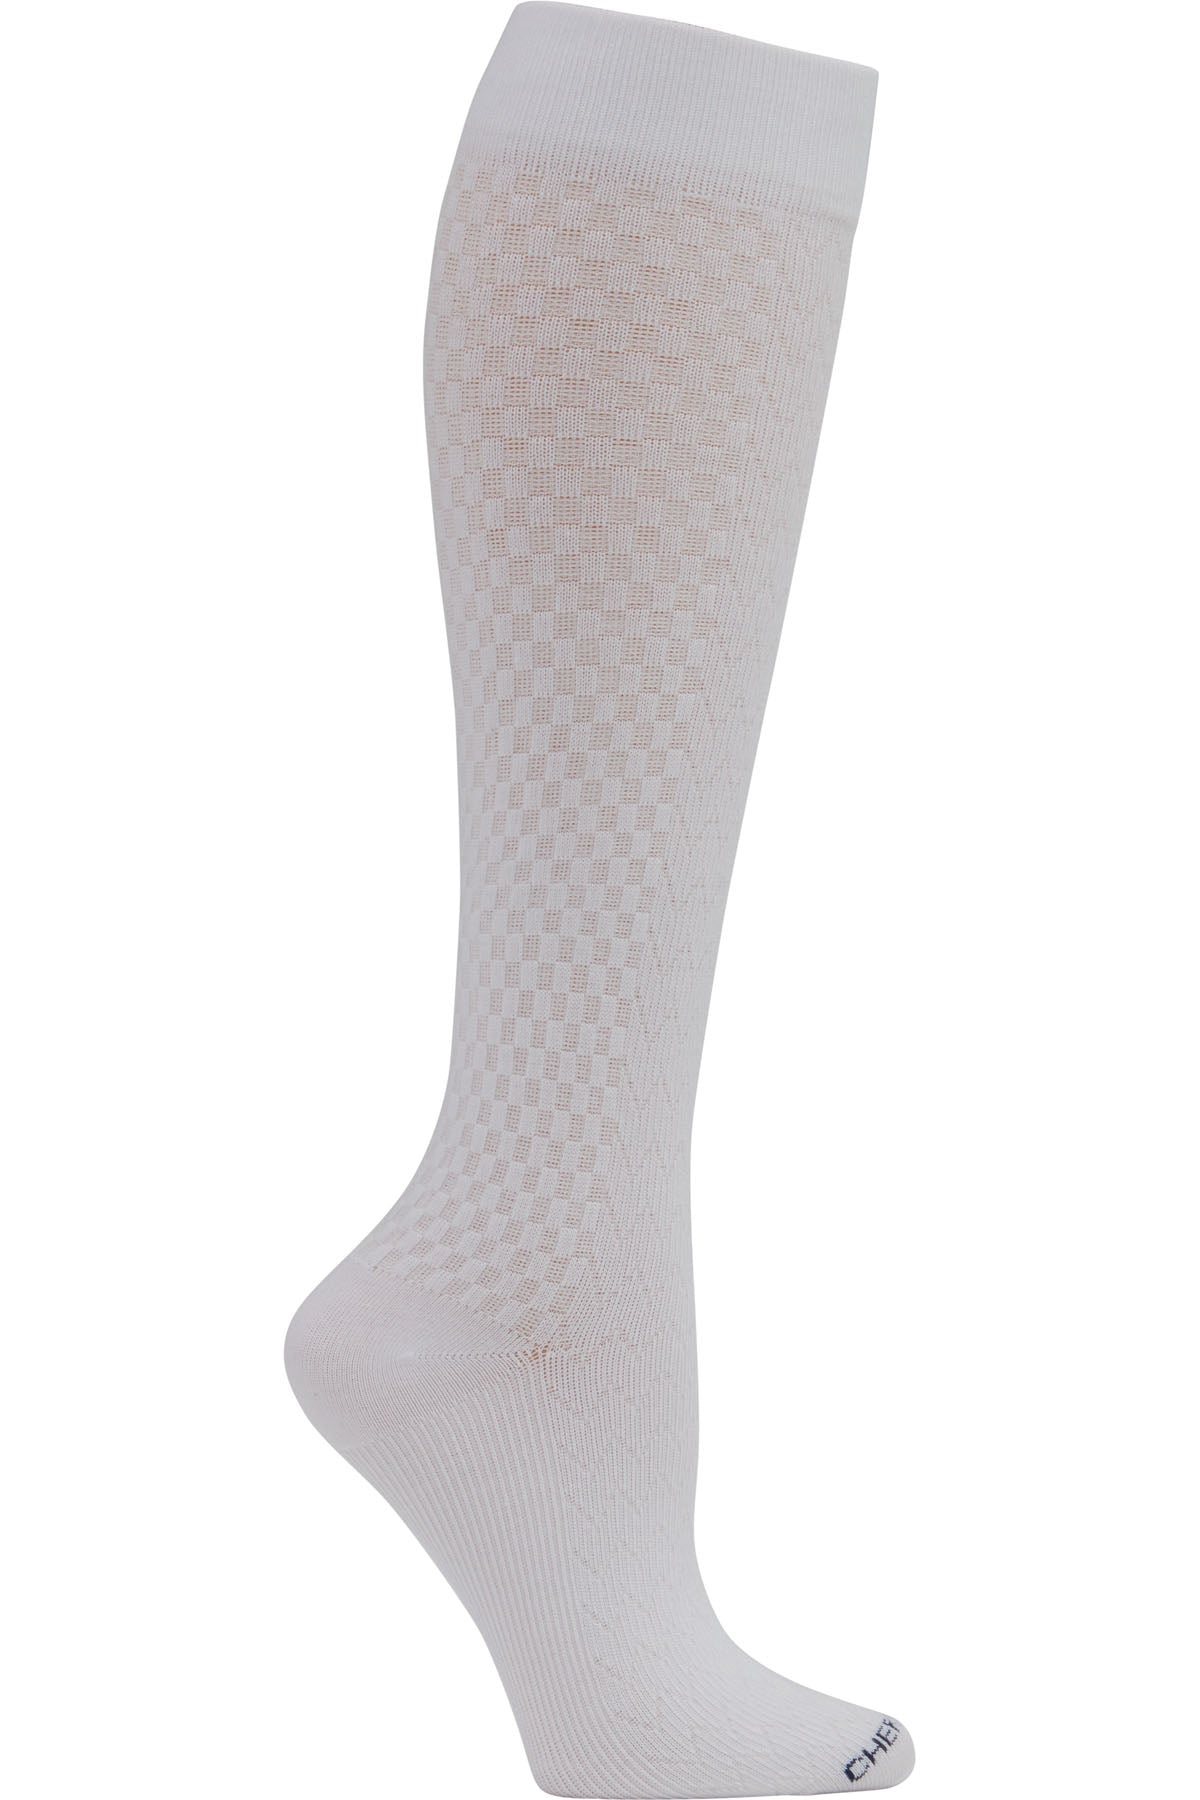 Cherokee Mild Compression Socks True Support 10-15 mmHg in White at Parker's Clothing and Shoes.